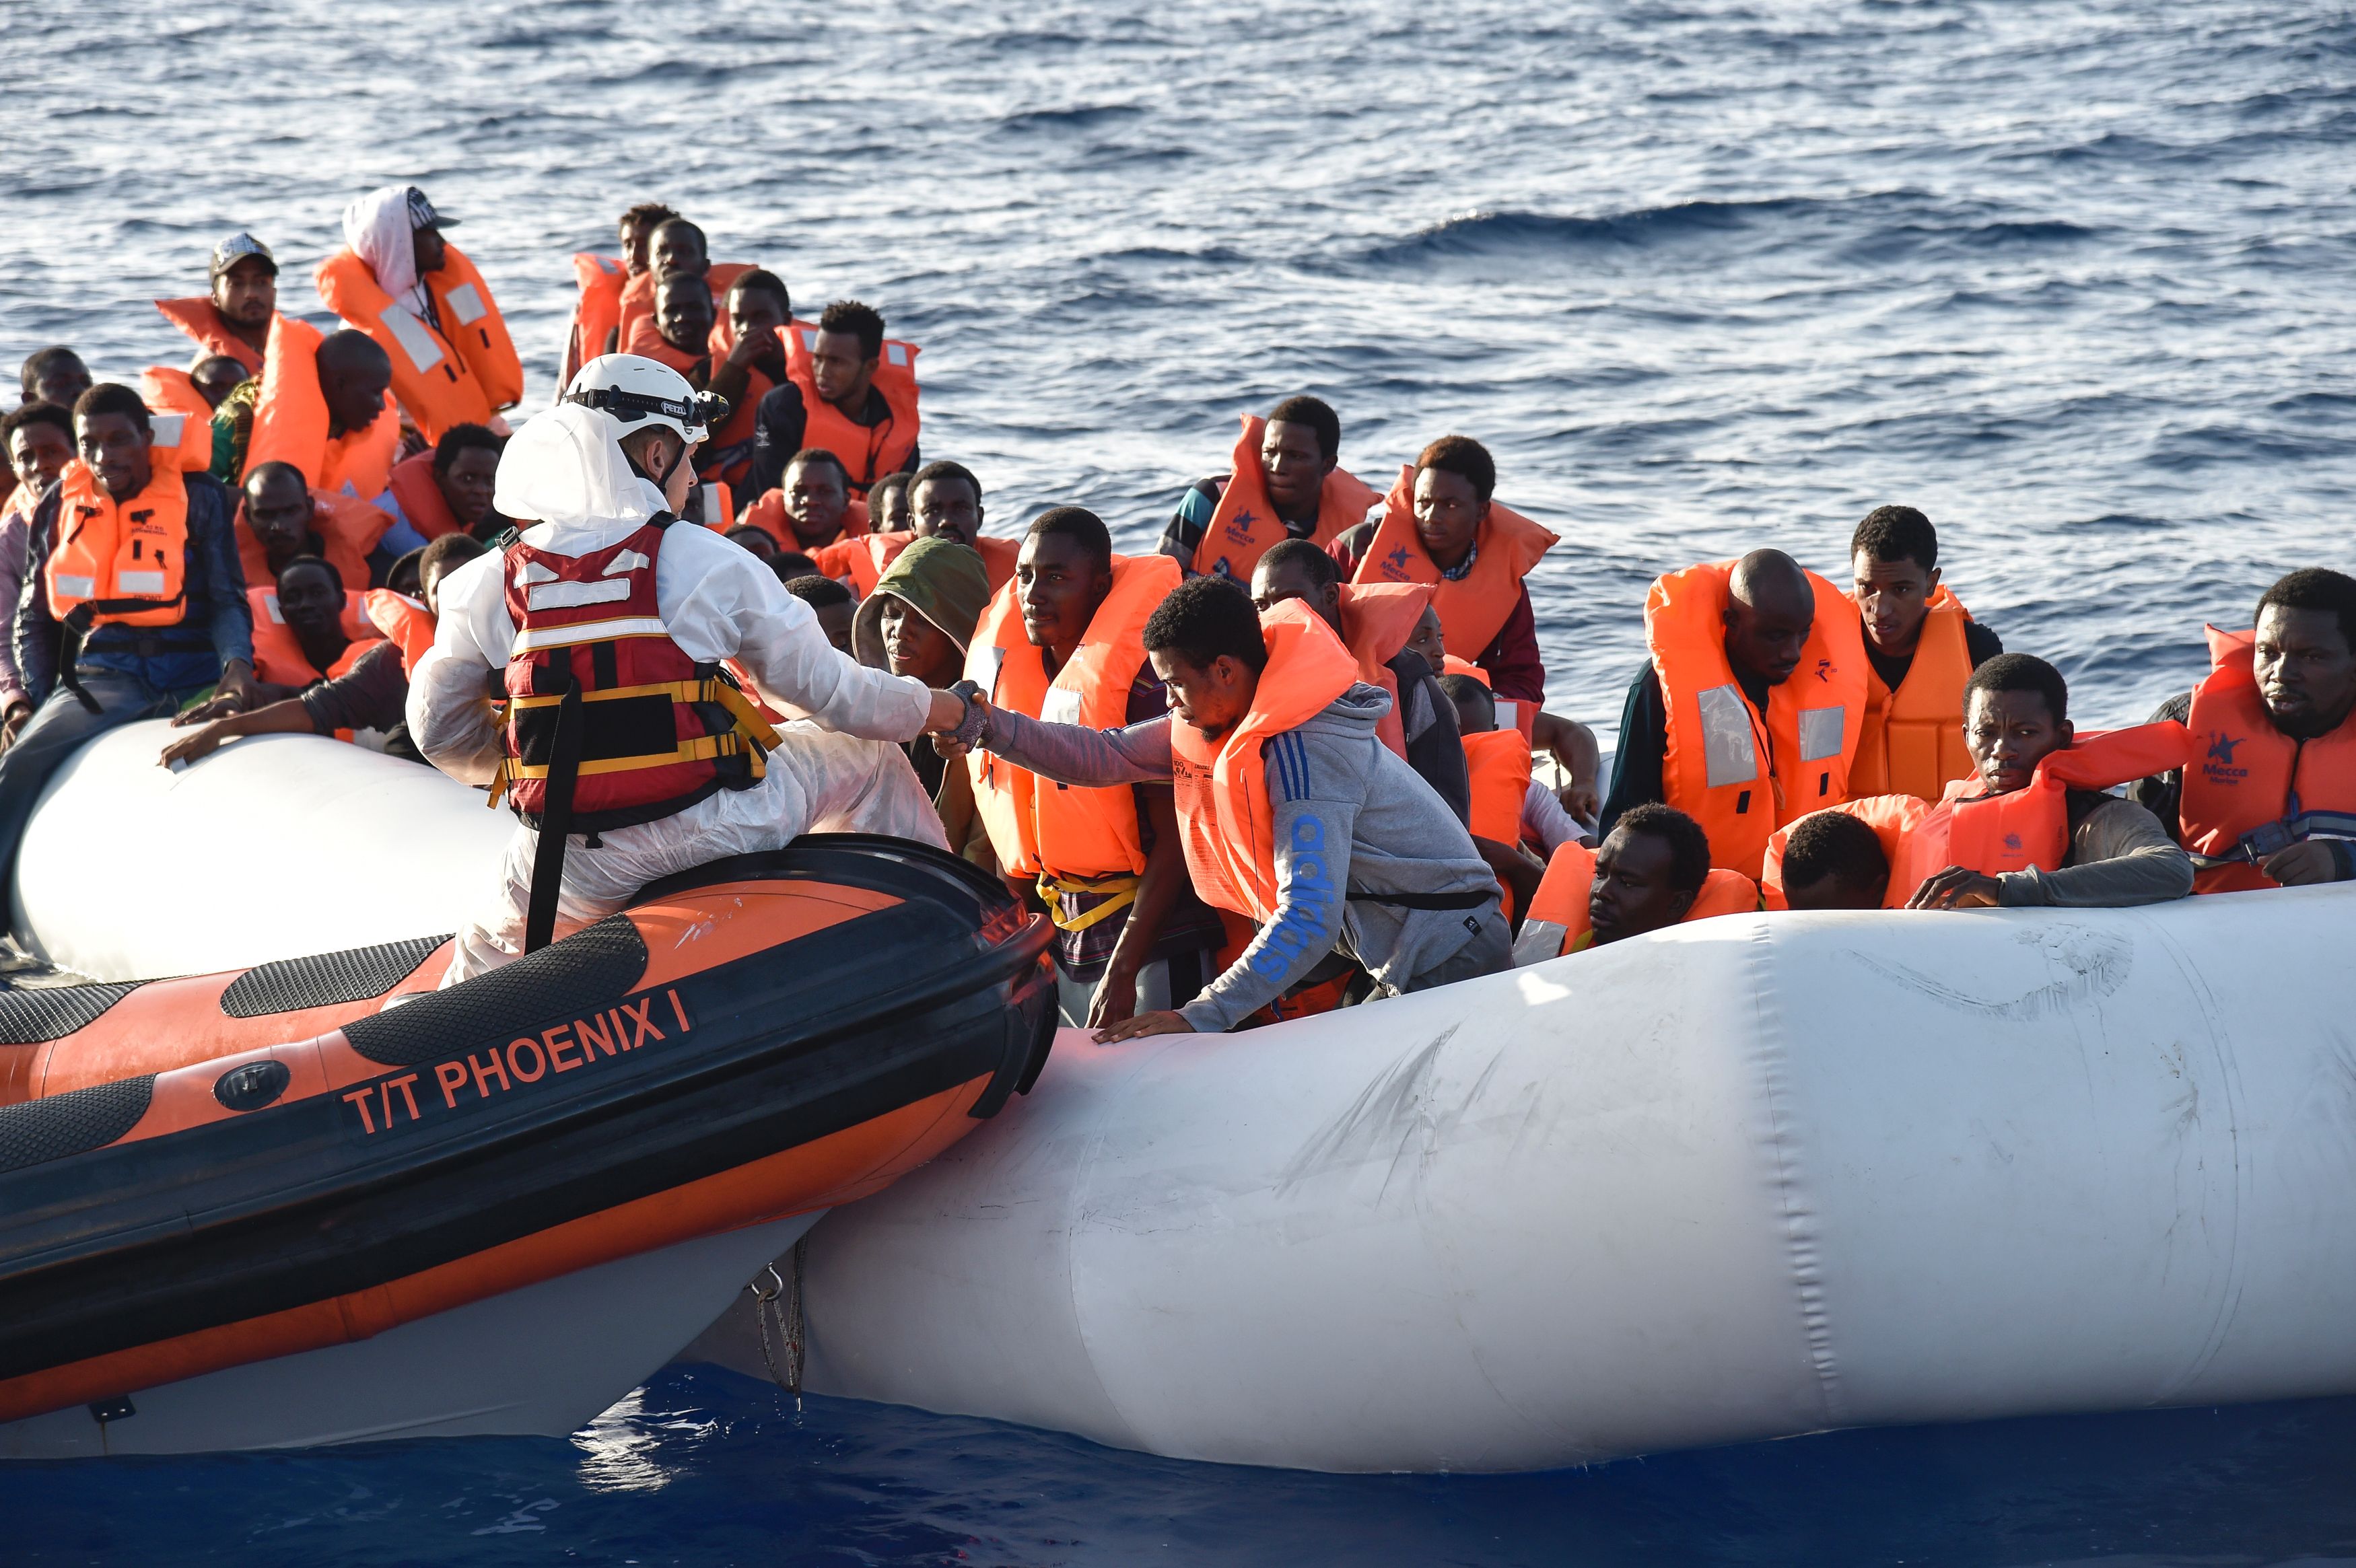 Members of Maltese NGO MOAS help people to board a small rescue boat during a rescue operation of migrants and refugees by the Topaz Responder ship run by Maltese NGO Moas and the Italian Red Cross, on Nov. 3, 2016, off the Libyan coast in the Mediterranean Sea. (Andreas Solaro—AFP/Getty Images)